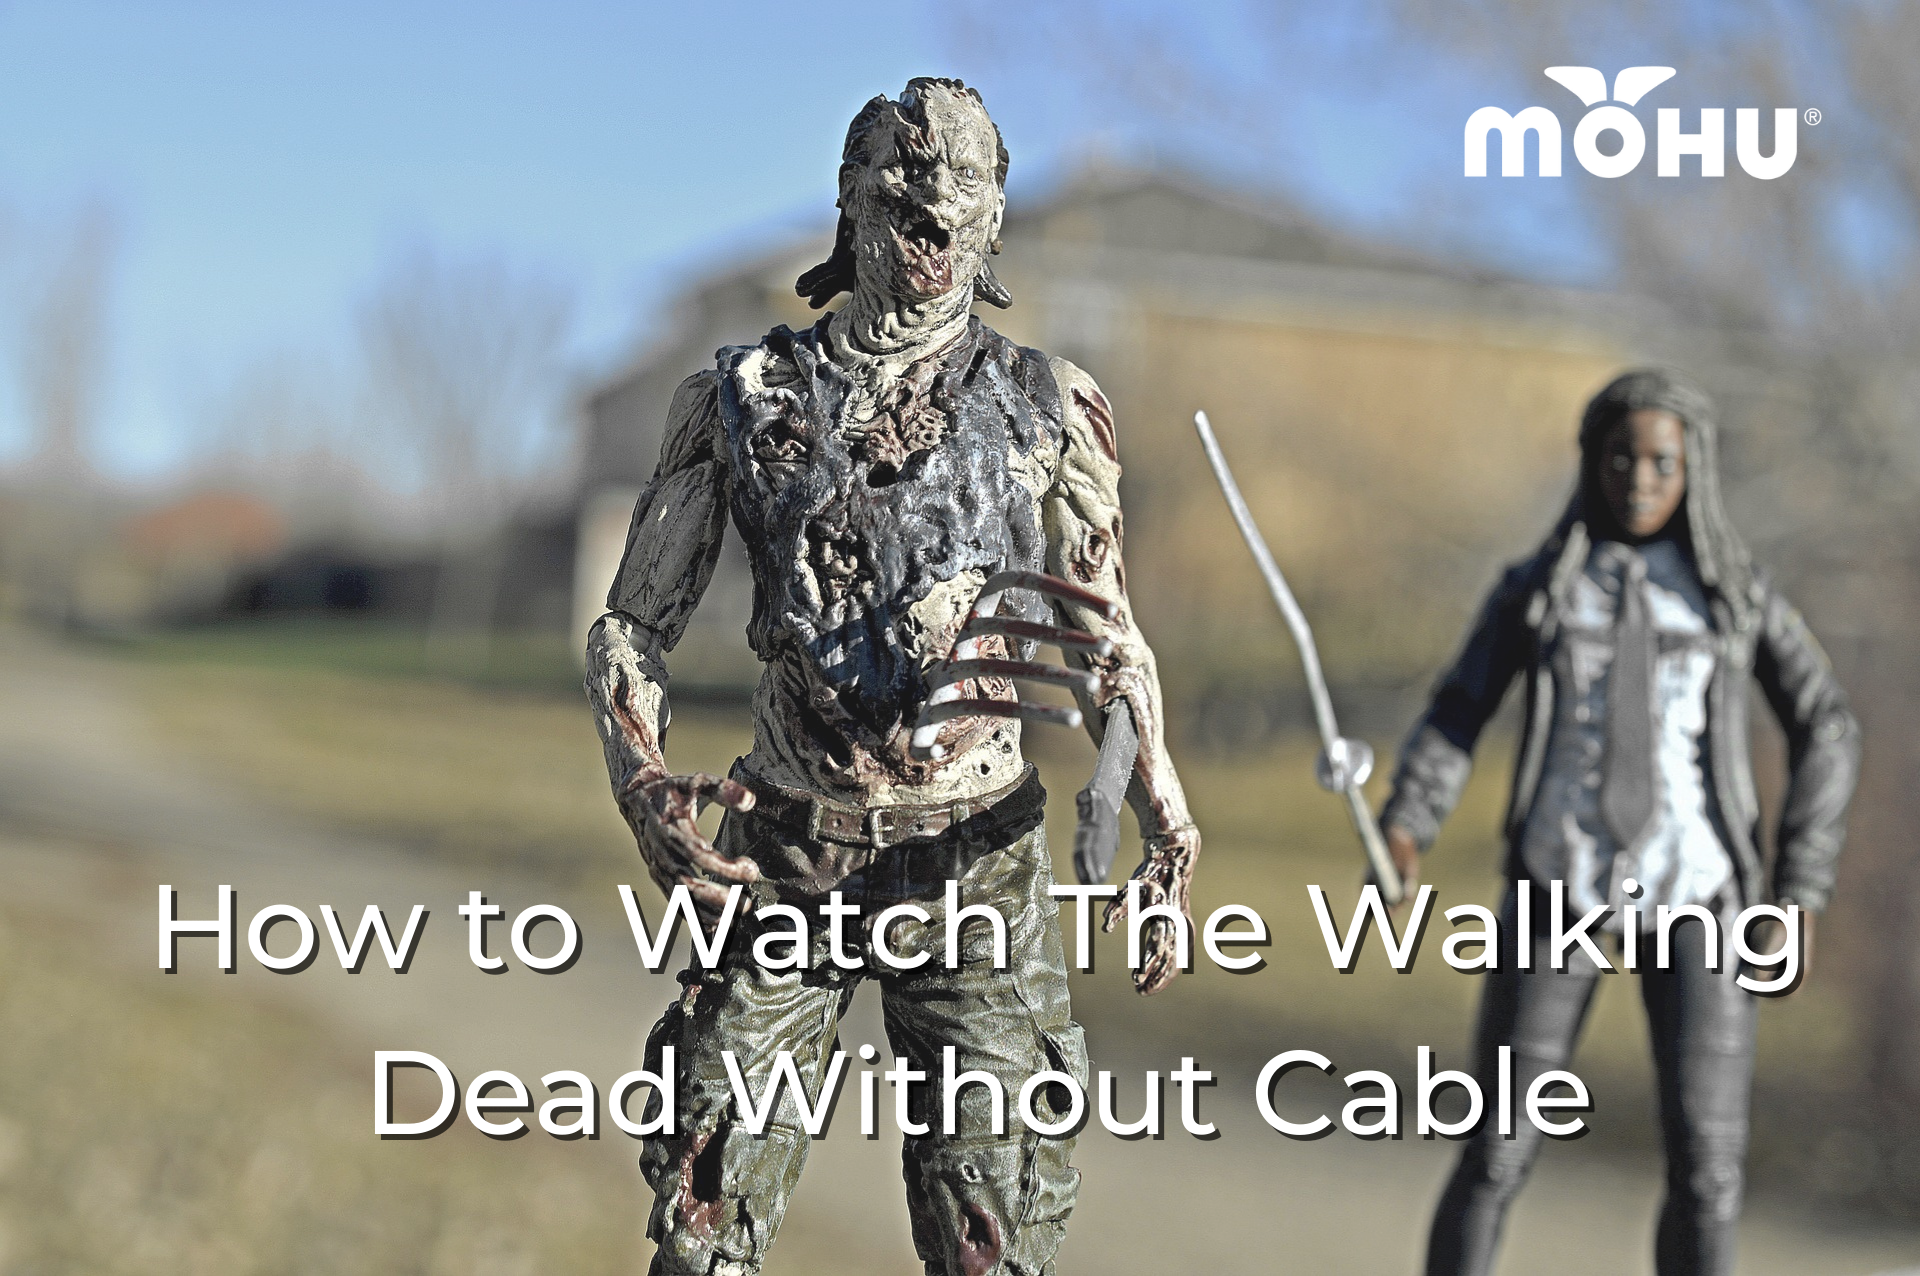 How to Watch The Walking Dead Without Cable with Mohu logo